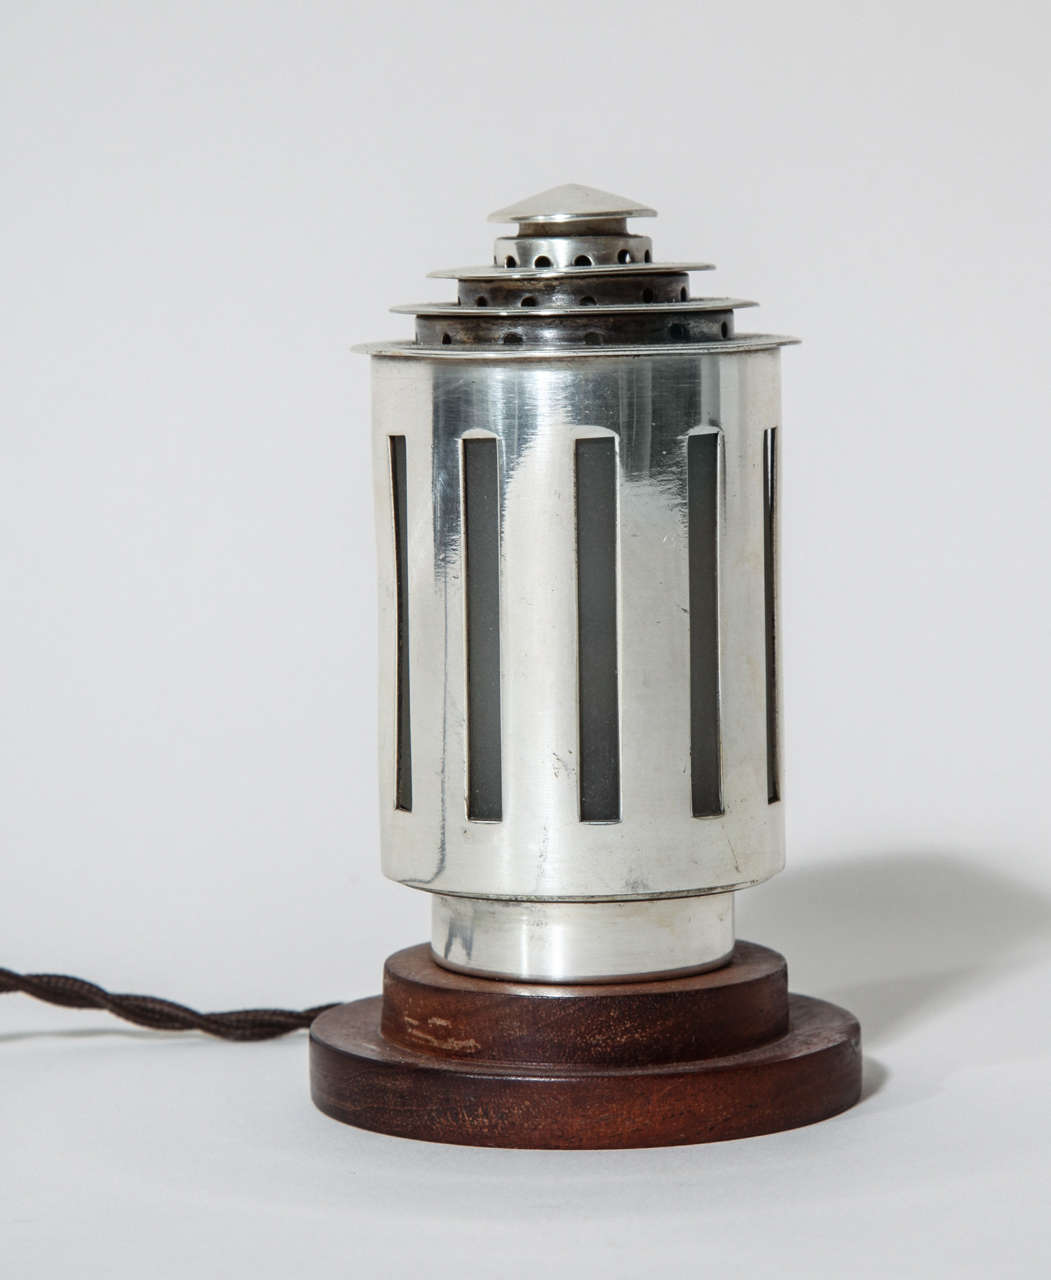 Nickelled metal cylinder with vertical openings over frosted glass cylinder with stepped top on stepped wood base.
Stamped: DESNY PARIS/ MADE IN FRANCE/ DEPOSE

M. Desnet and Clement Nauny (1900-1969), who in 1927 with the financial backing of M.